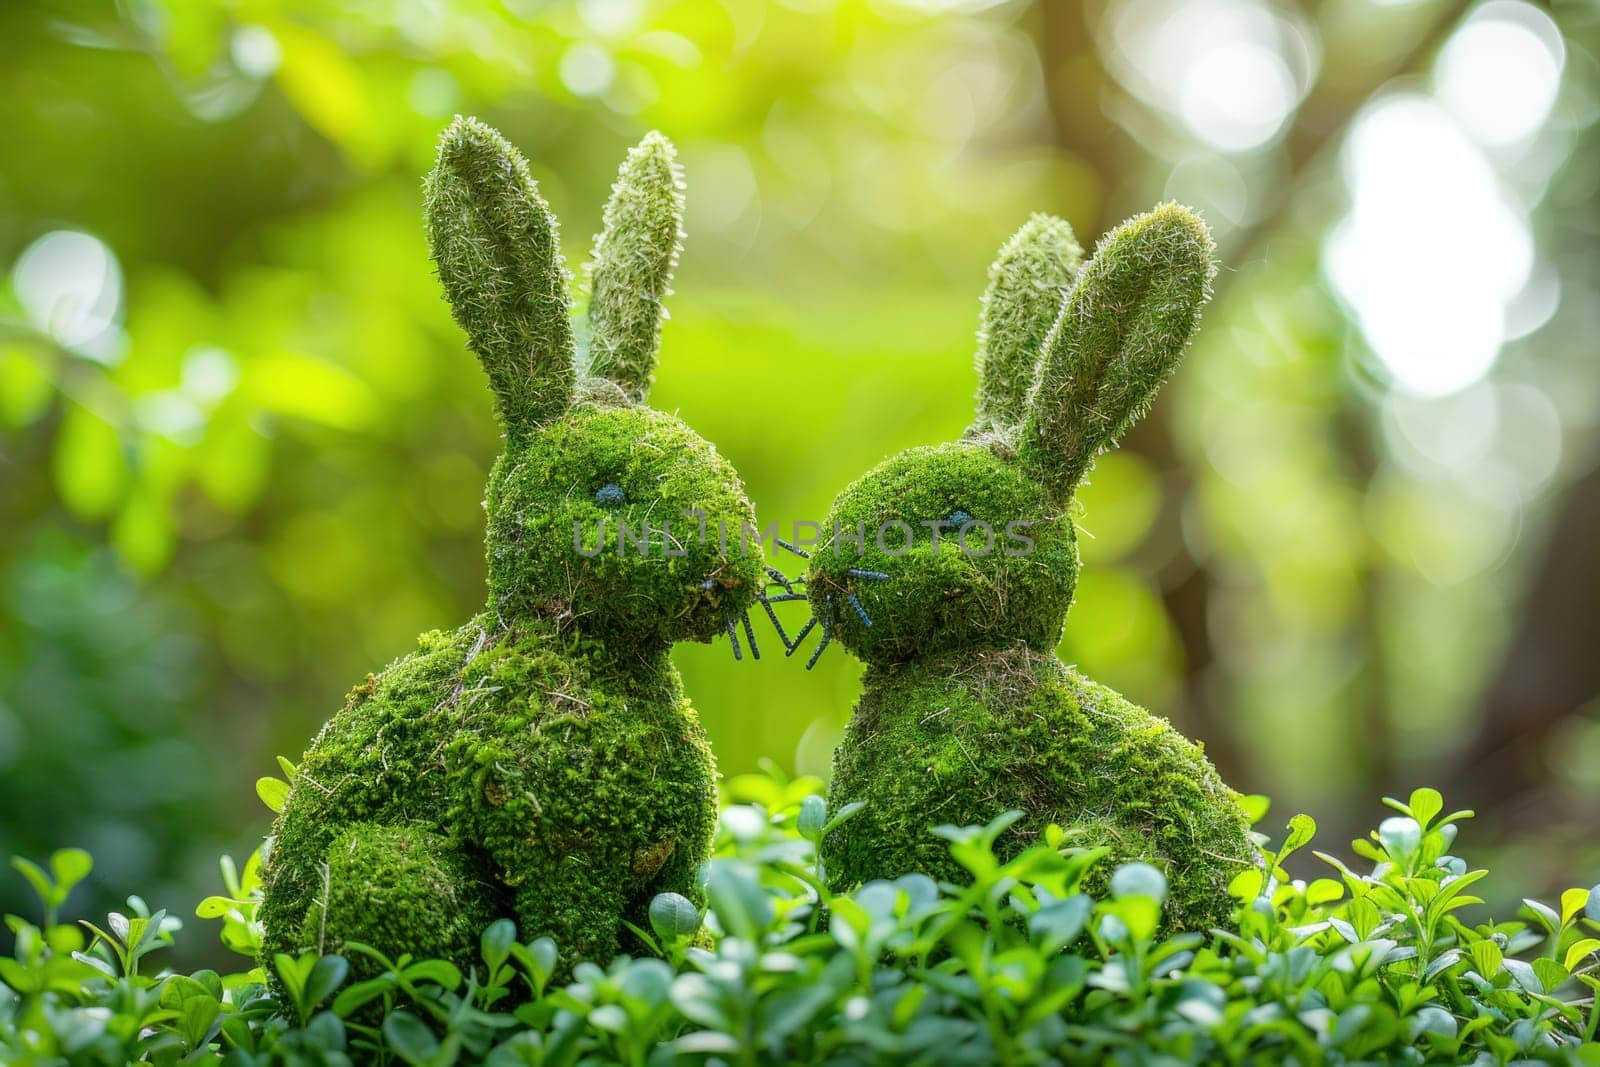 Two adorable moss bunny sculptures in a serene natural setting with lush greenery and trees surrounding